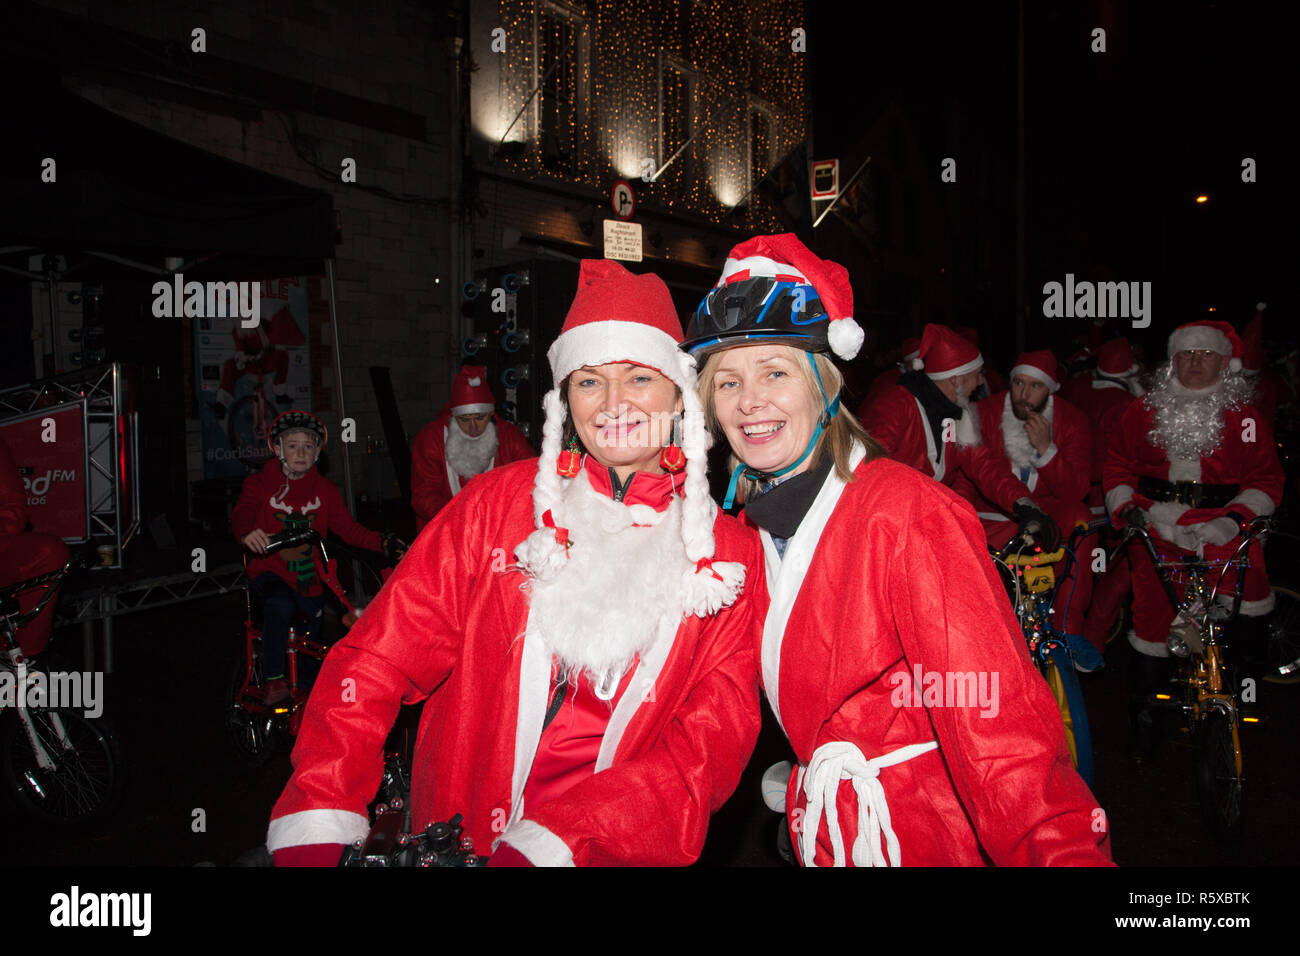 Cork City, Cork, Ireland. 02nd December, 2018. Patsy and Carmel Deasy who took part in the Santa Cycle to raise funds for the medical support group Straight Ahead which provides surgery, support and medical equipment for children with orthopaedic conditions in Cork, Ireland. Credit: David Creedon/Alamy Live News Stock Photo